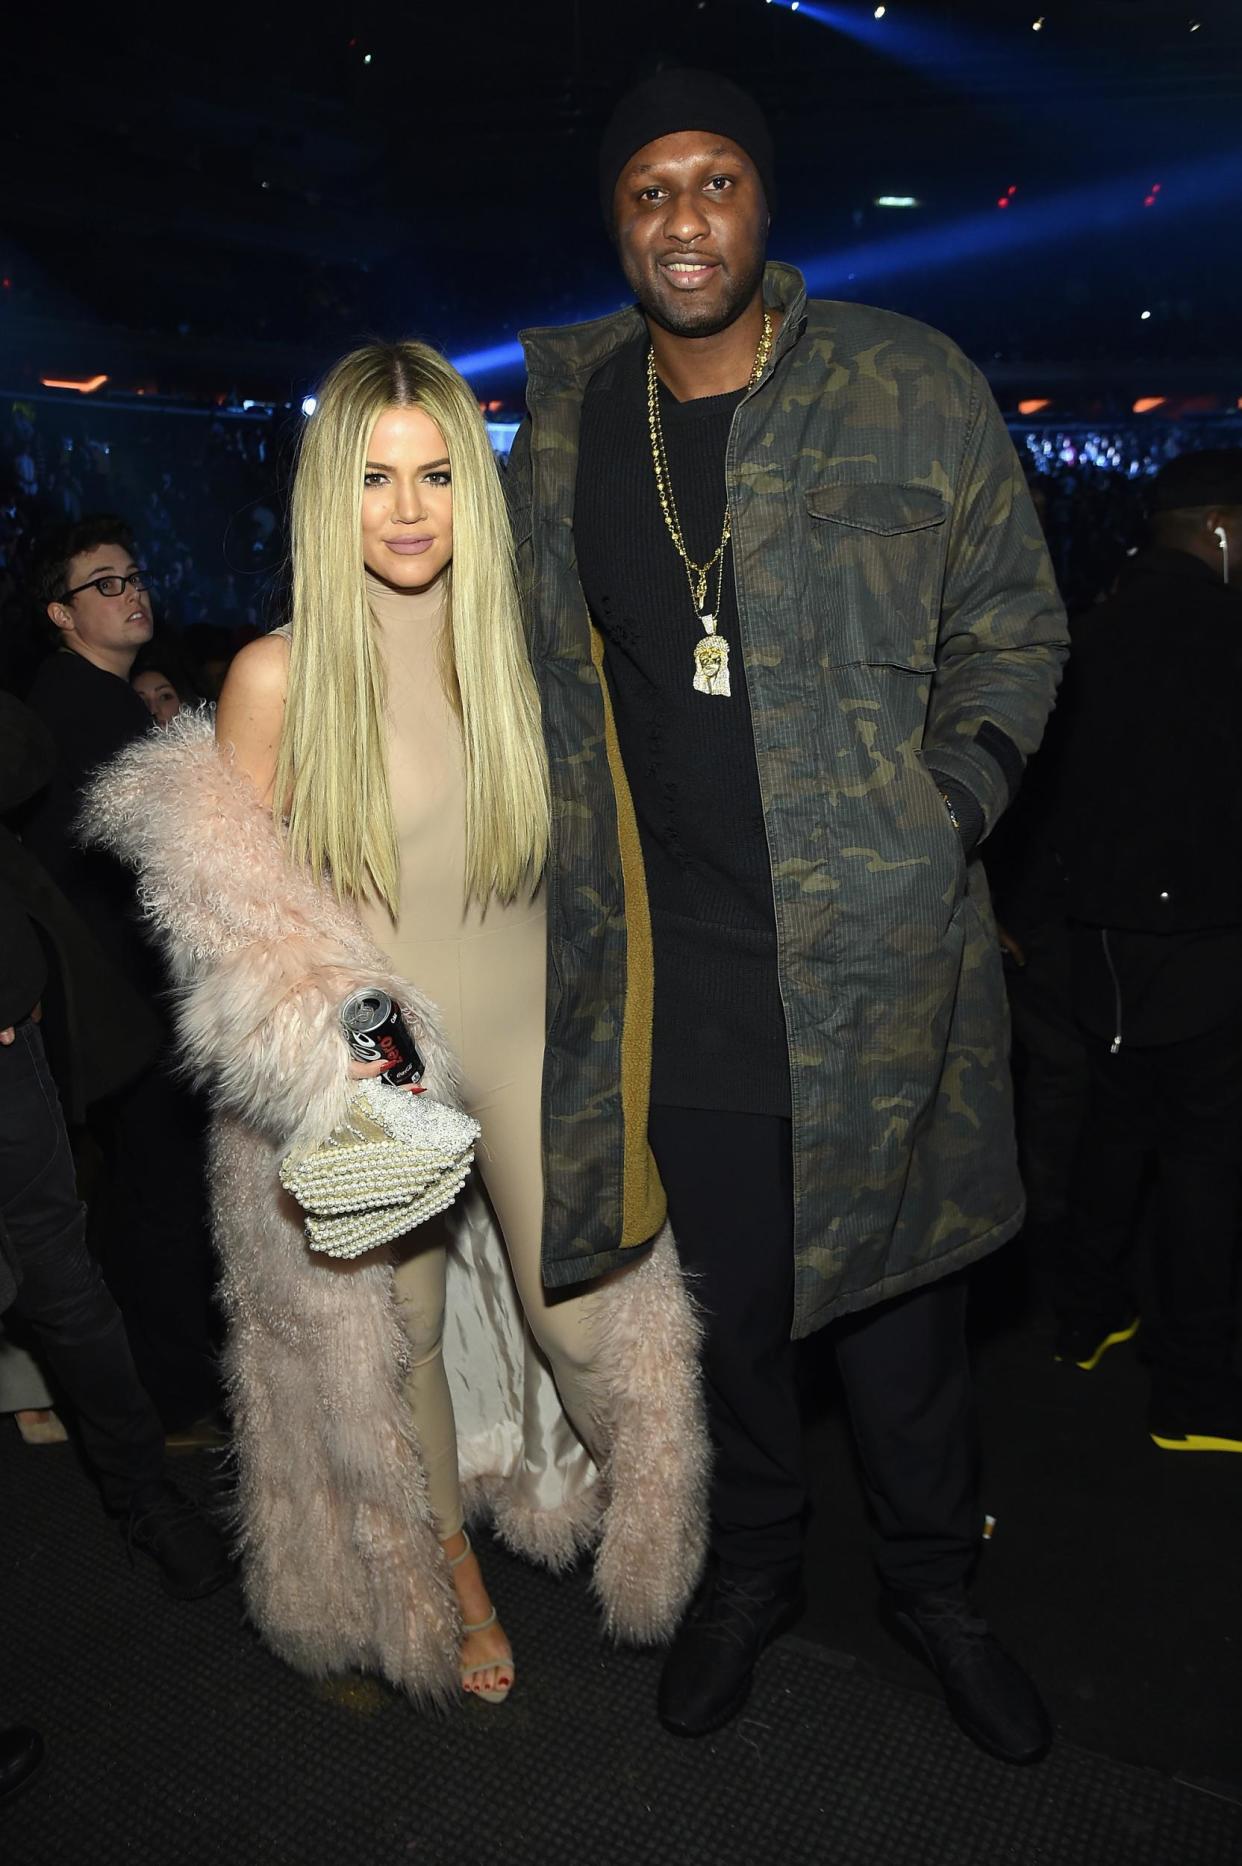 'Happy for her': Odom gives his blessing to Kardashian: Jamie McCarthy/Getty Images